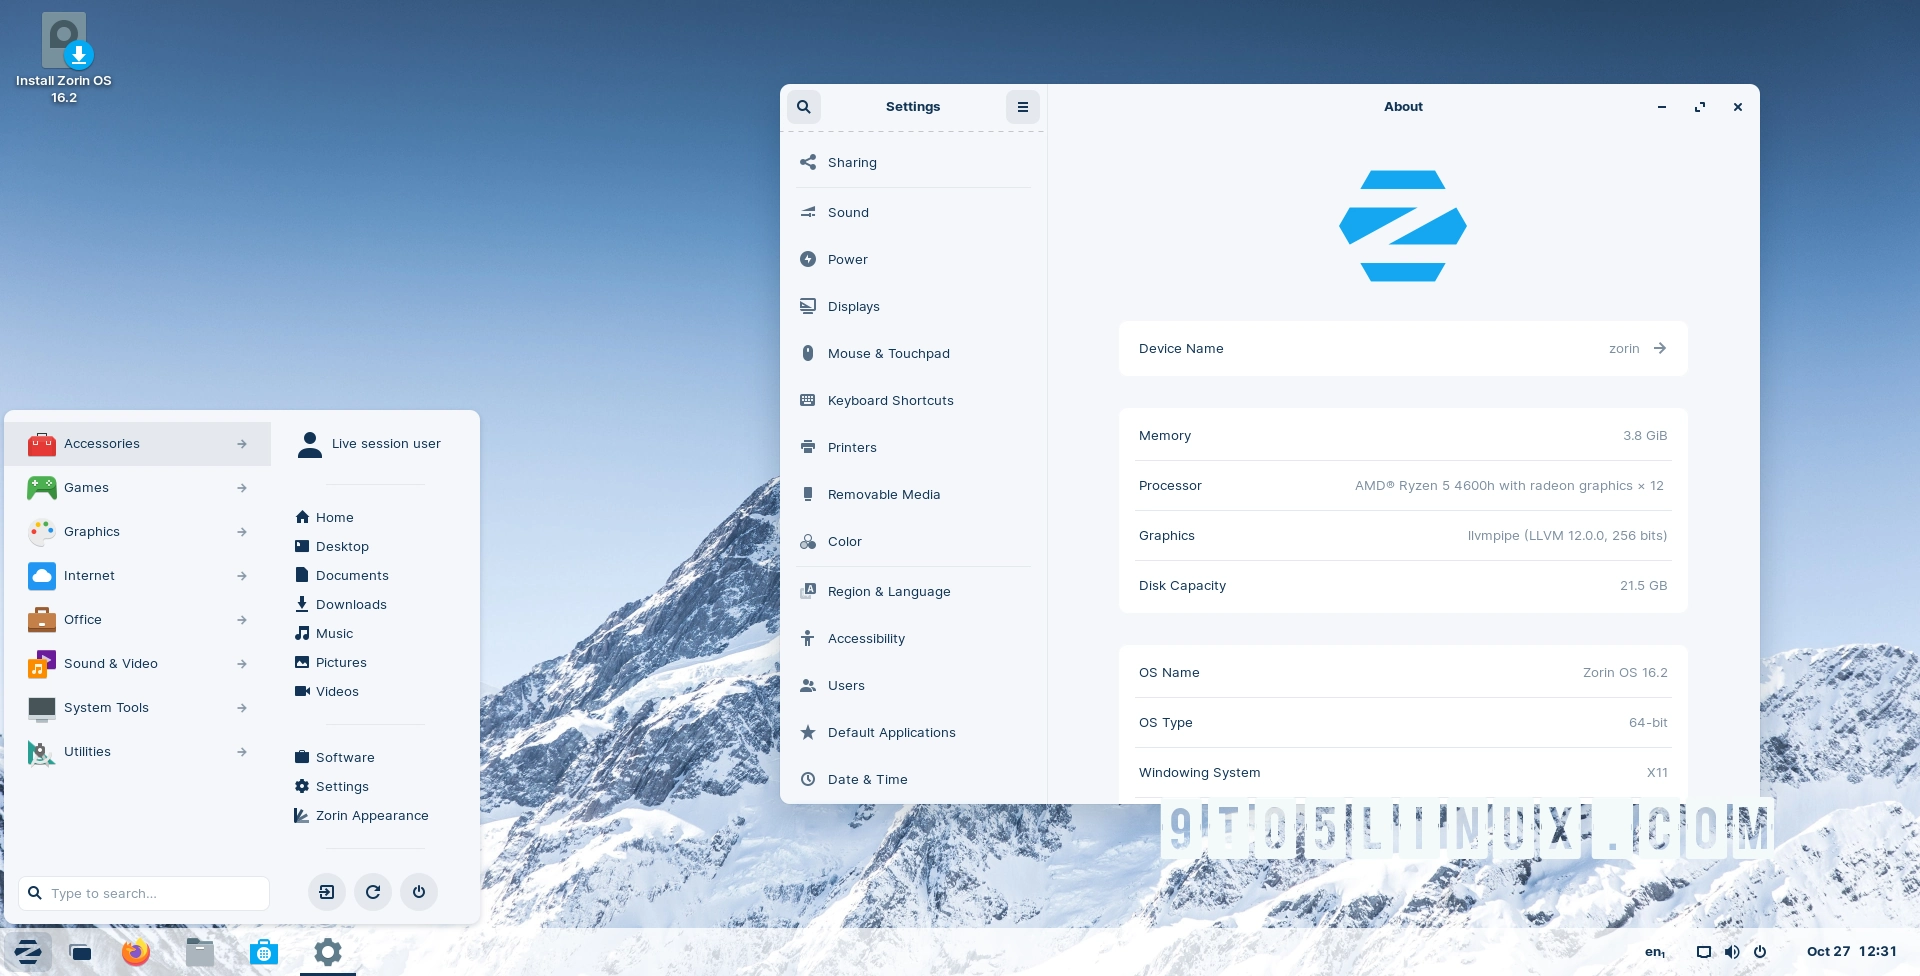 Zorin OS 16.2 Arrives as a Friendly and Accessible Alternative to Windows 11